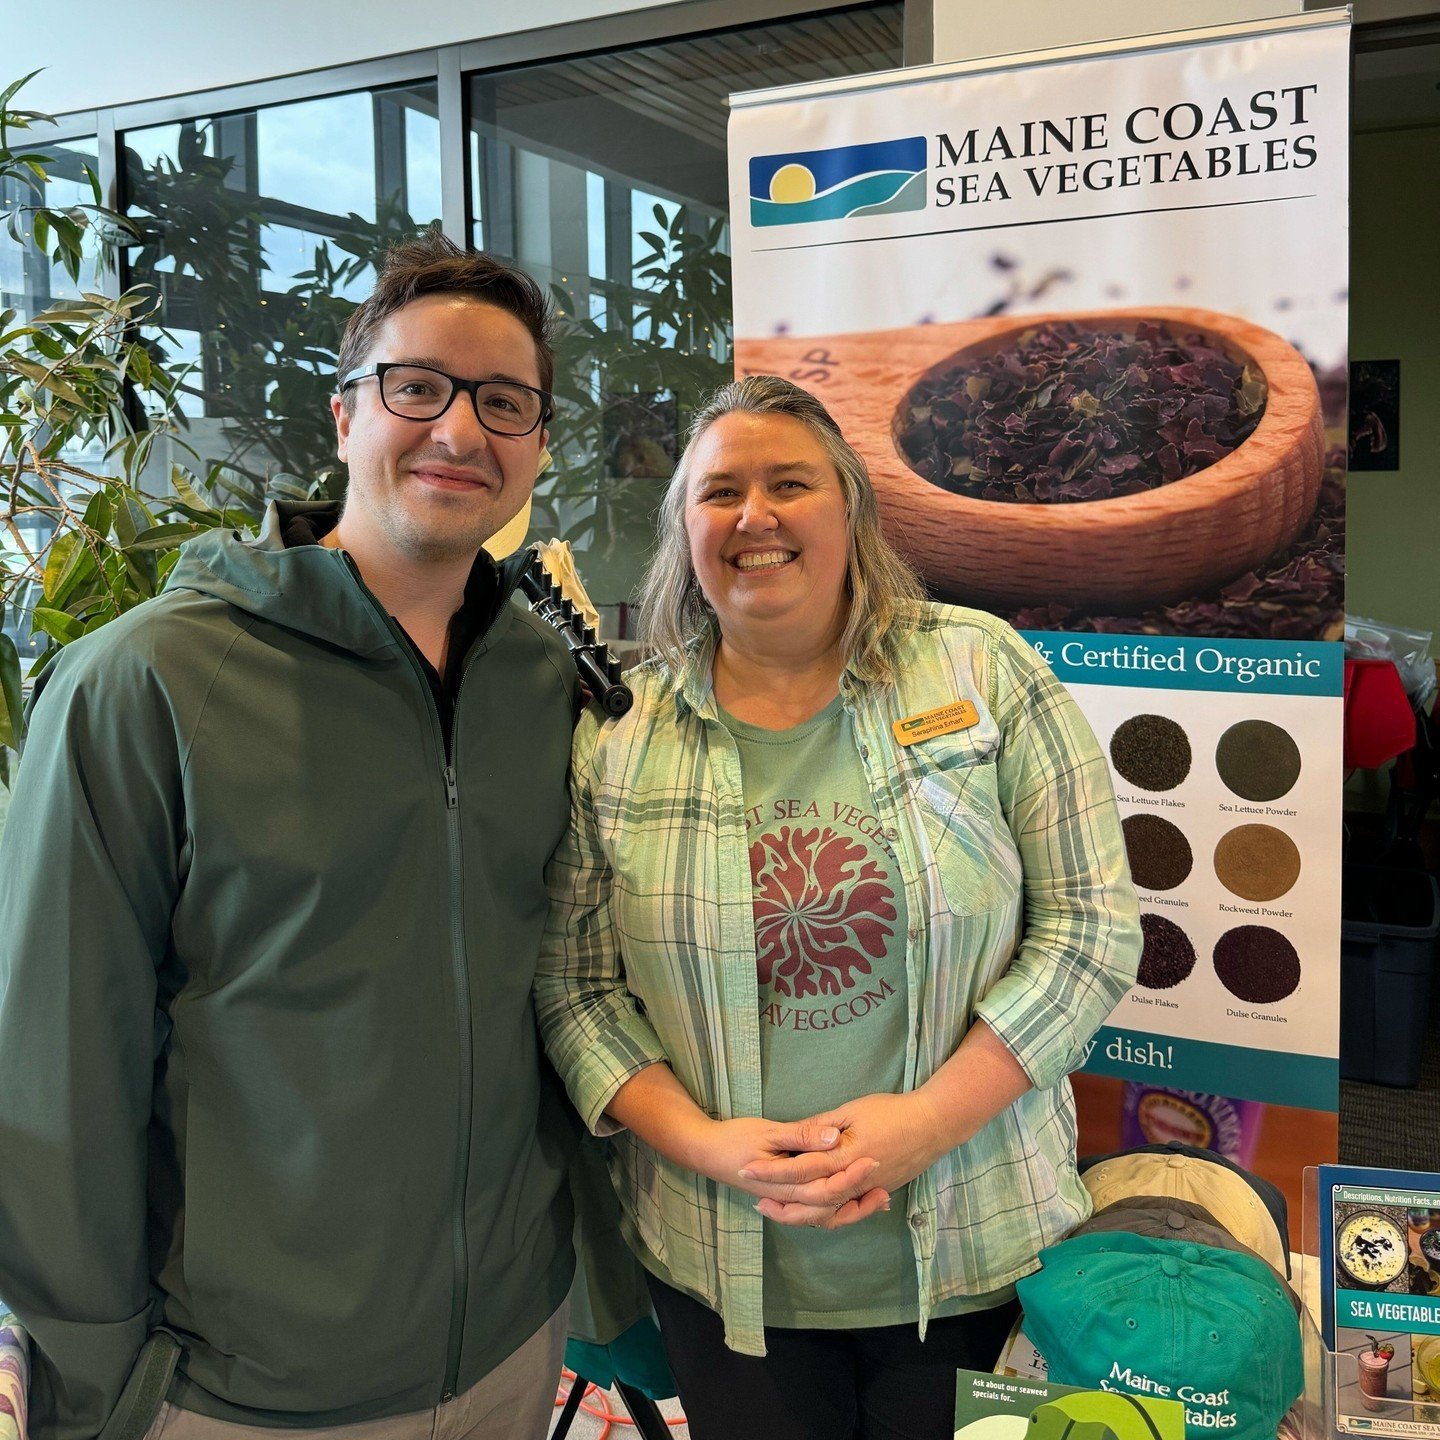 Meet the maker of Maine Coast Sea Vegetables Kelp Krunch Bars!

They have generously shared their delectable kelp bars for MIFF's filmmaker welcome bags for years! Spotlighting incredible Maine owned businesses, such as Maine Coast Sea Vegetables, is